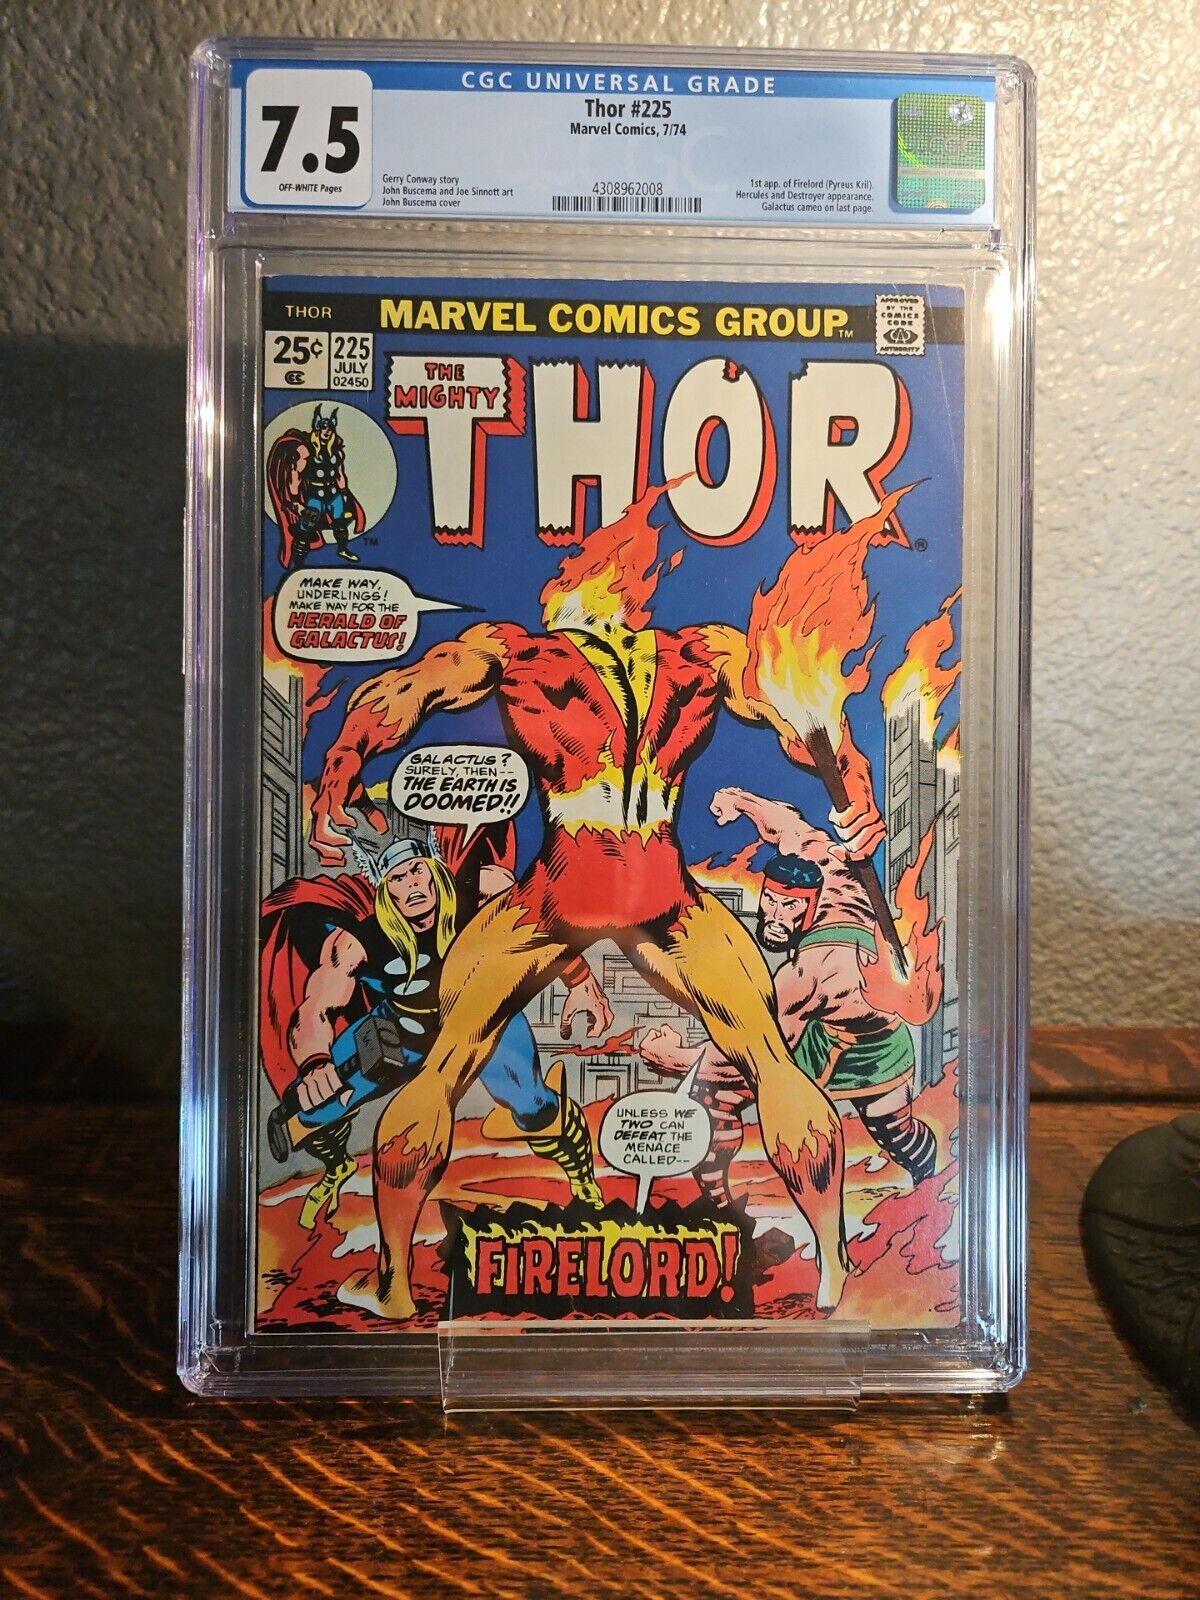 🔥The Mighty Thor #225, CGC 7.5, 1st Appearance Of The Firelord🔥